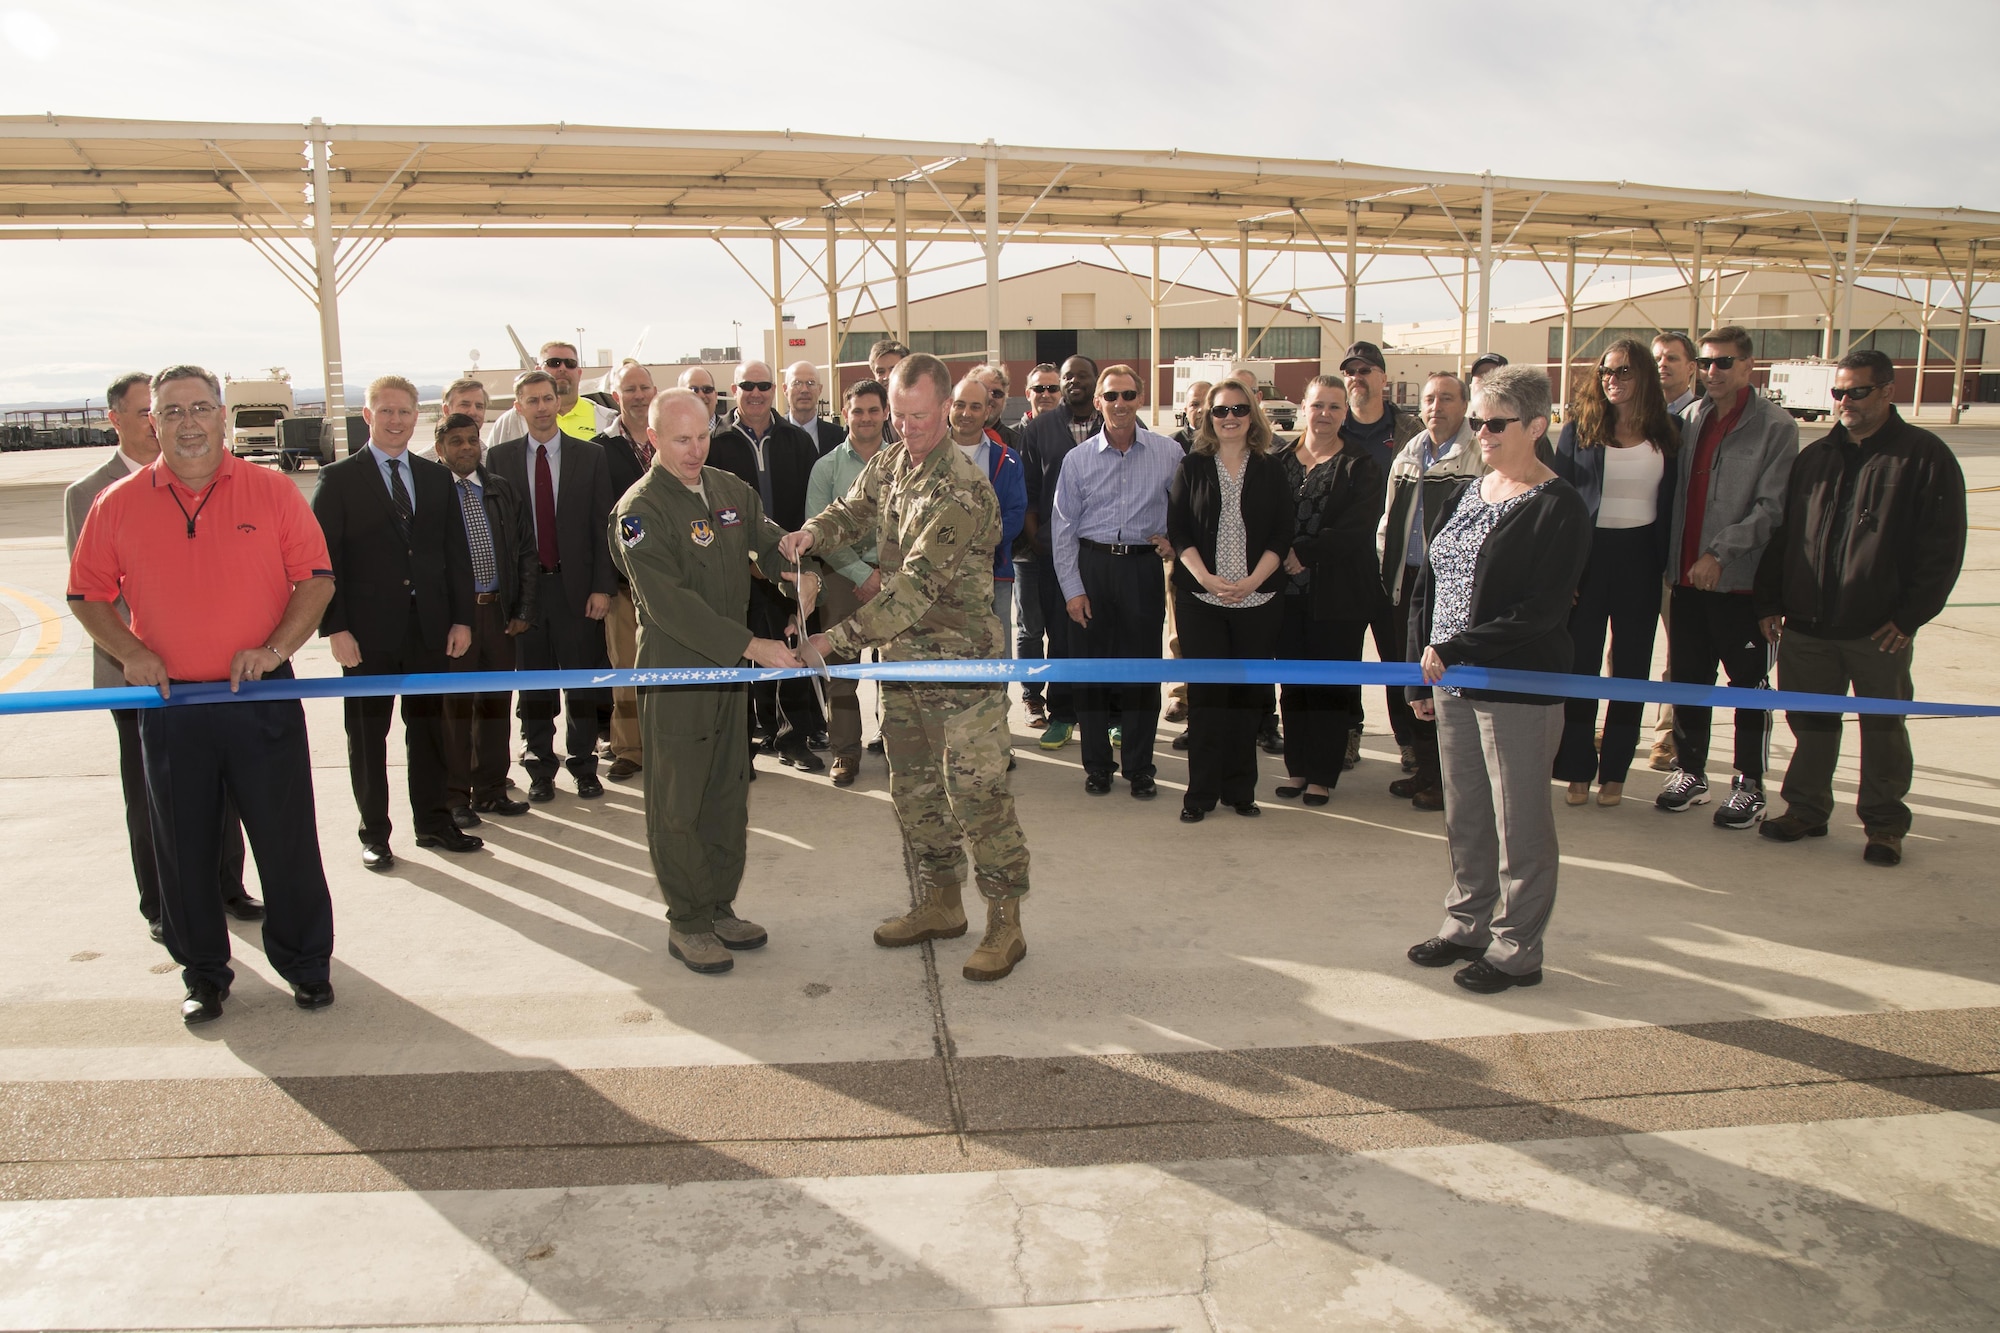 With scissors in hand, Brig. Gen. Carl Schaefer, 412th Test Wing commander (left, and Army Col. Kirk Gibbs, U.S. Army Corps of Engineers Los Angeles District commander, prepare to cut the ceremonial ribbon signifying the official opening of the new 411th Flight Test Squadron facility March 22. The squadron is responsible for the developmental testing of the F-22 Raptor and its systems. (U.S. Air Force photo by Christian Turner)